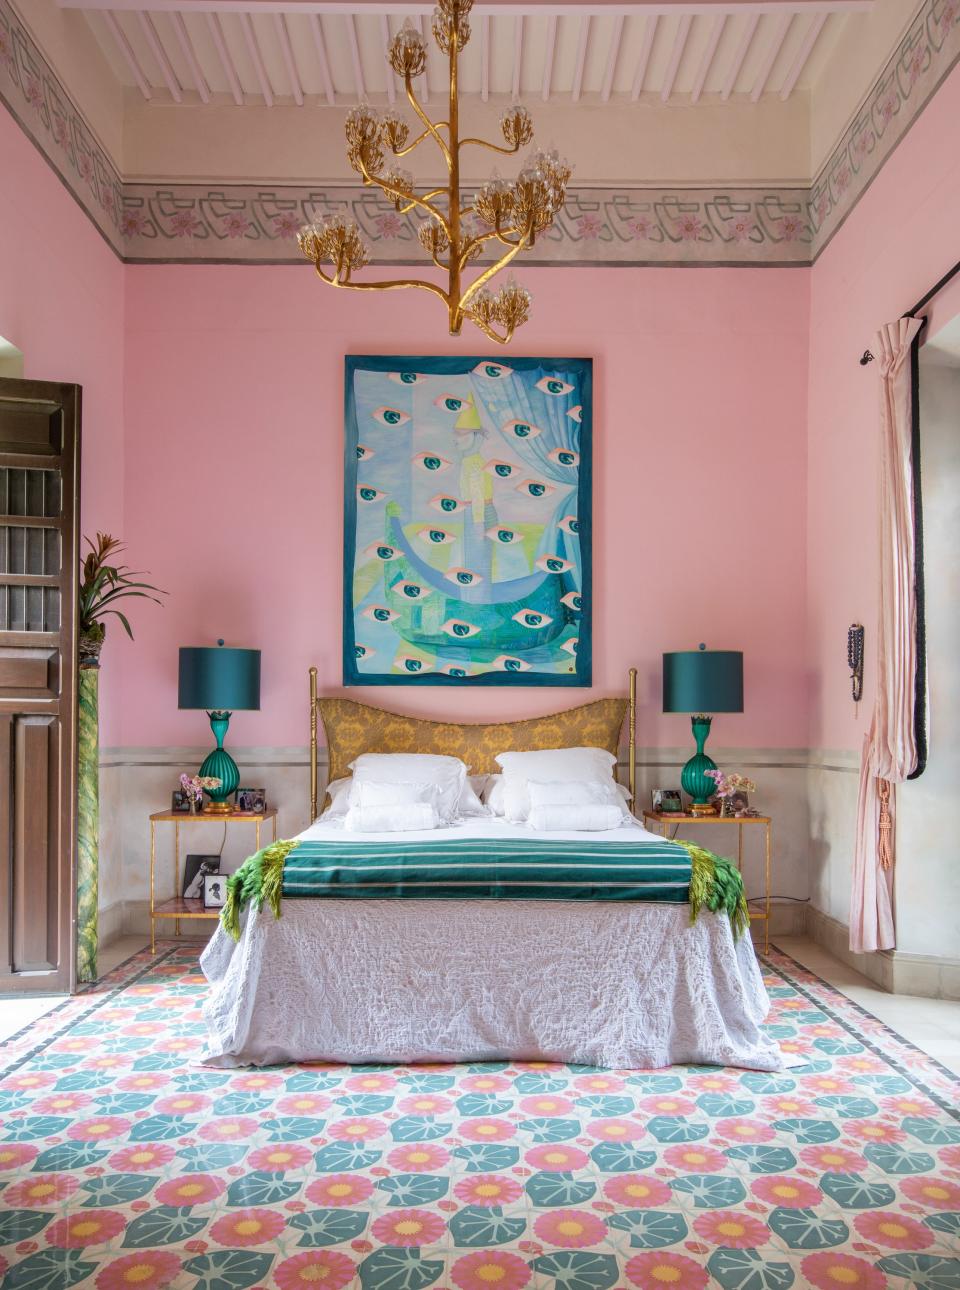 One of Skouras’s Currey & Company light fixtures hangs in the primary bedroom, where she also designed the rose quartz−and−gold leaf bedsides tables and the headboard, which is upholstered in a Fortuny fabric. The lamps are vintage Murano and the painting is by David Serrano.